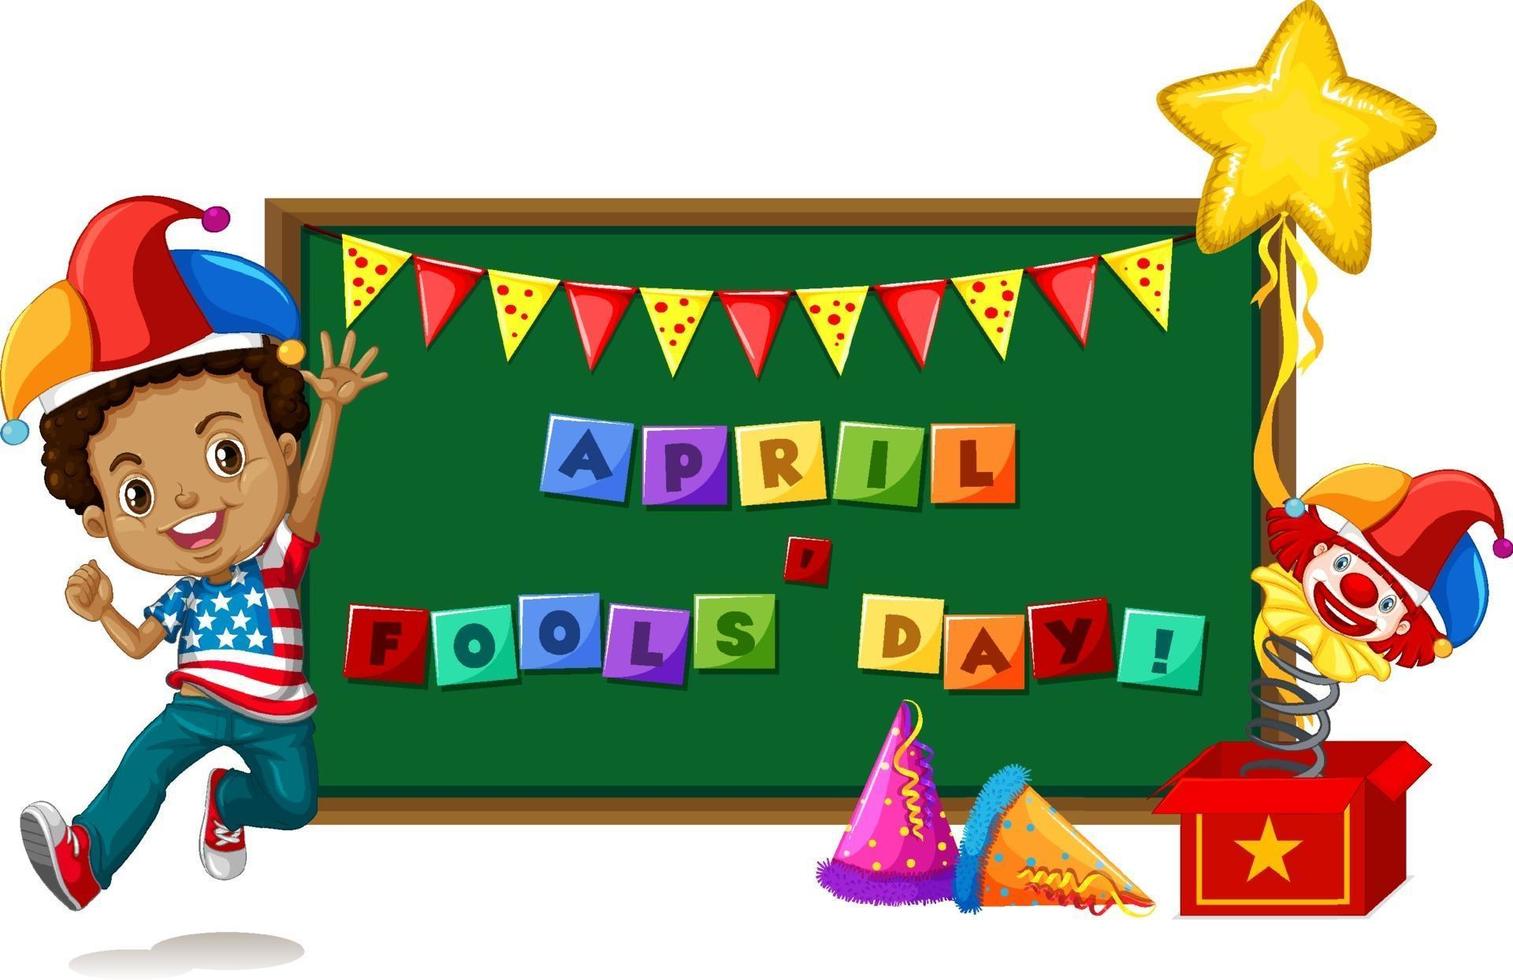 April Fool's Day font logo on chalkboard with a boy wearing jester hat vector